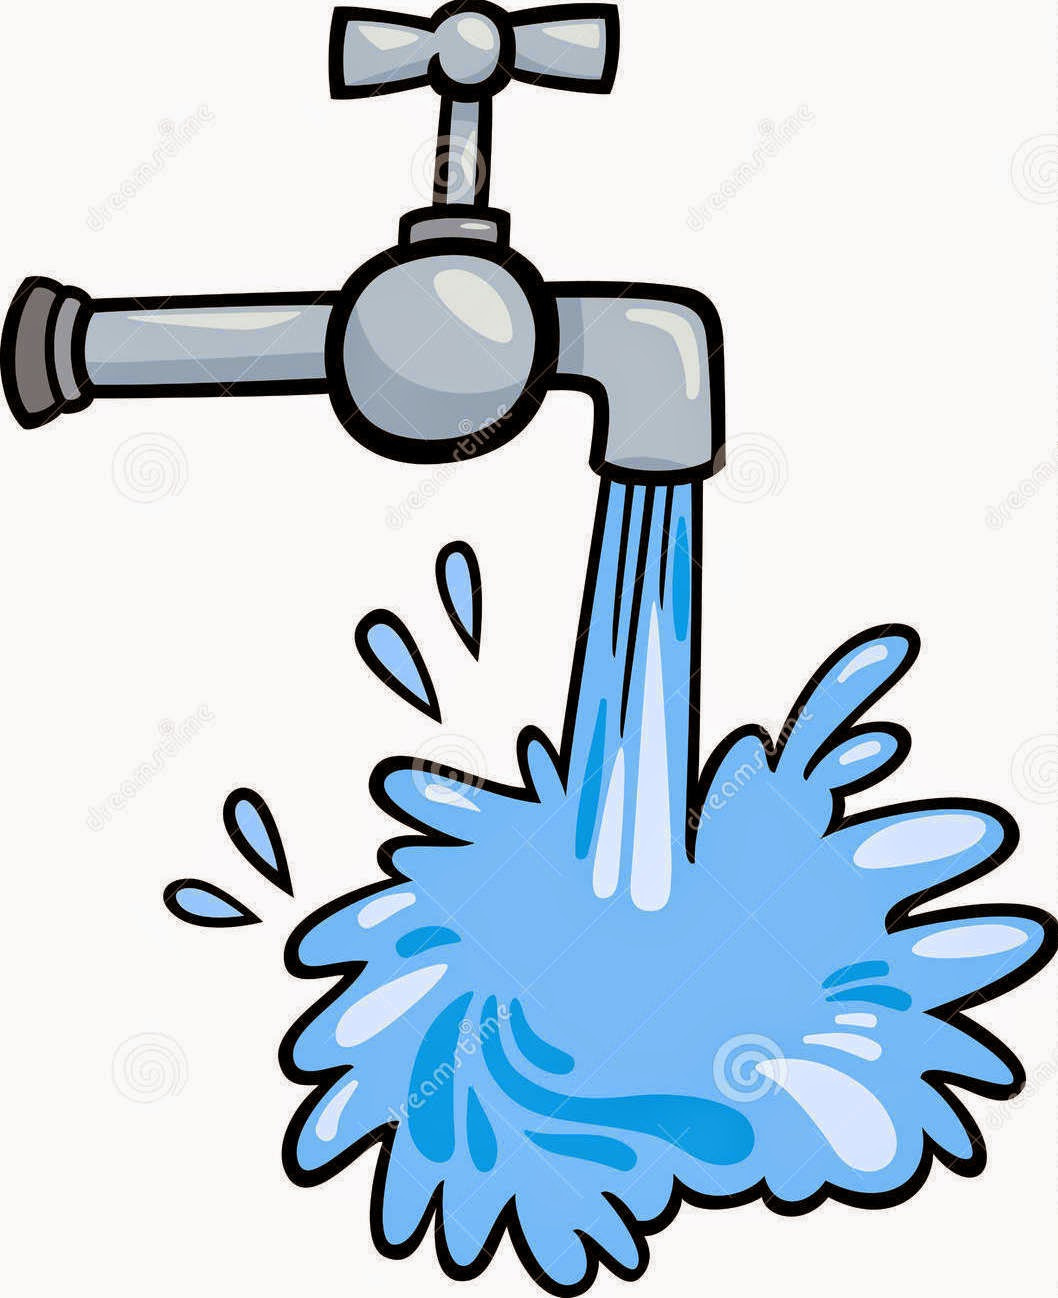 flowing-water-clipart-water-tap-clip-art-cartoon-illustration-pouring ...